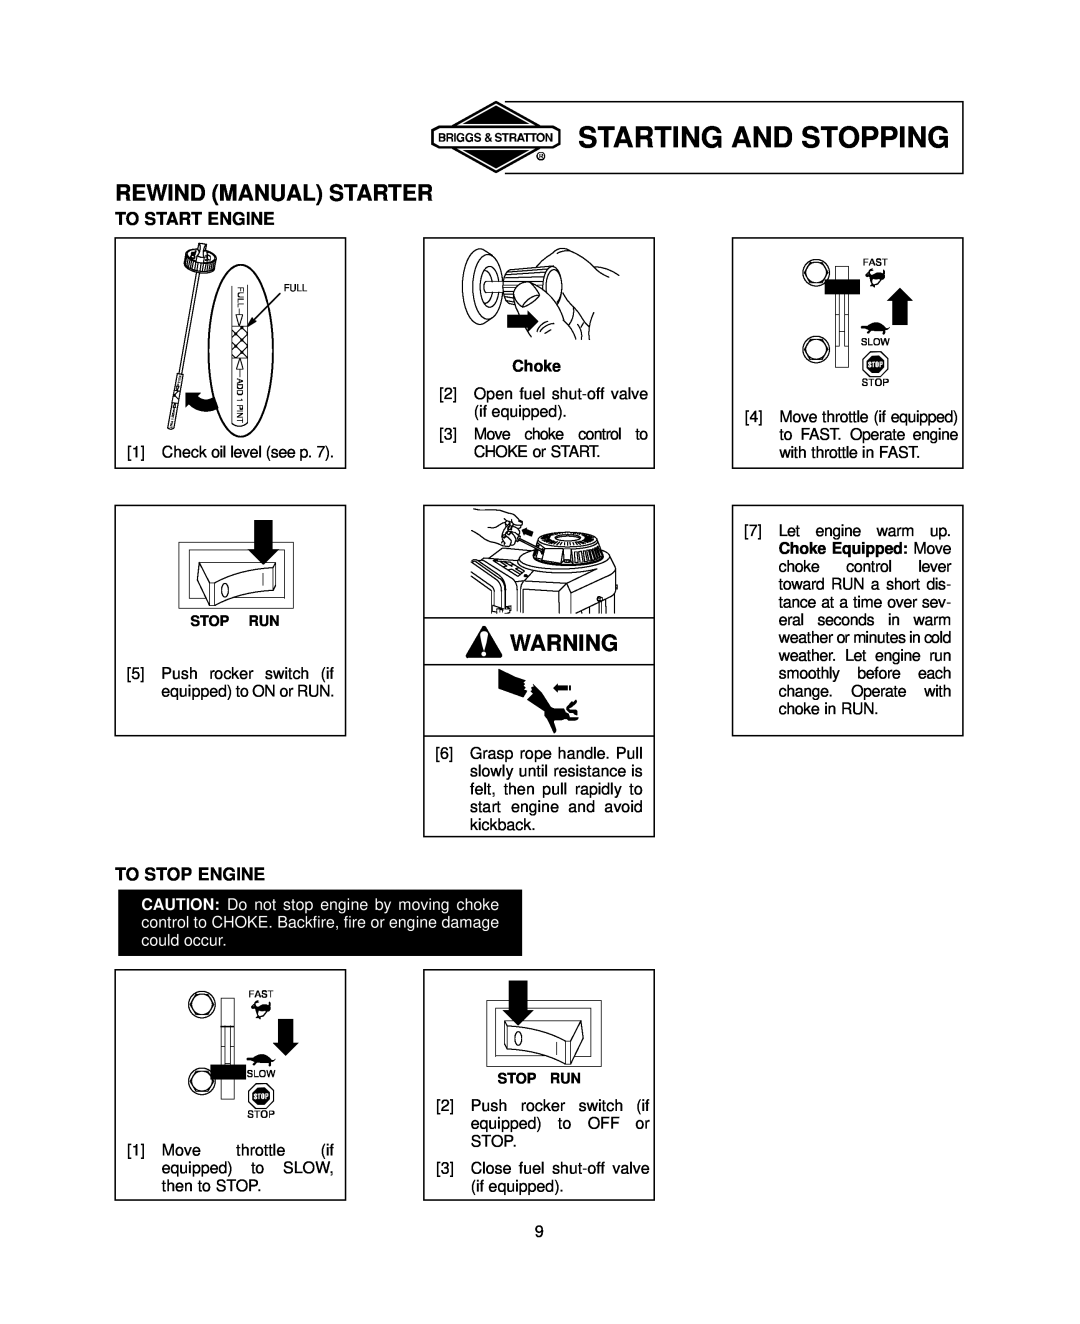 Briggs & Stratton 351700, 380700, 381700 Starting And Stopping, Rewind Manual Starter, To Start Engine, To Stop Engine 